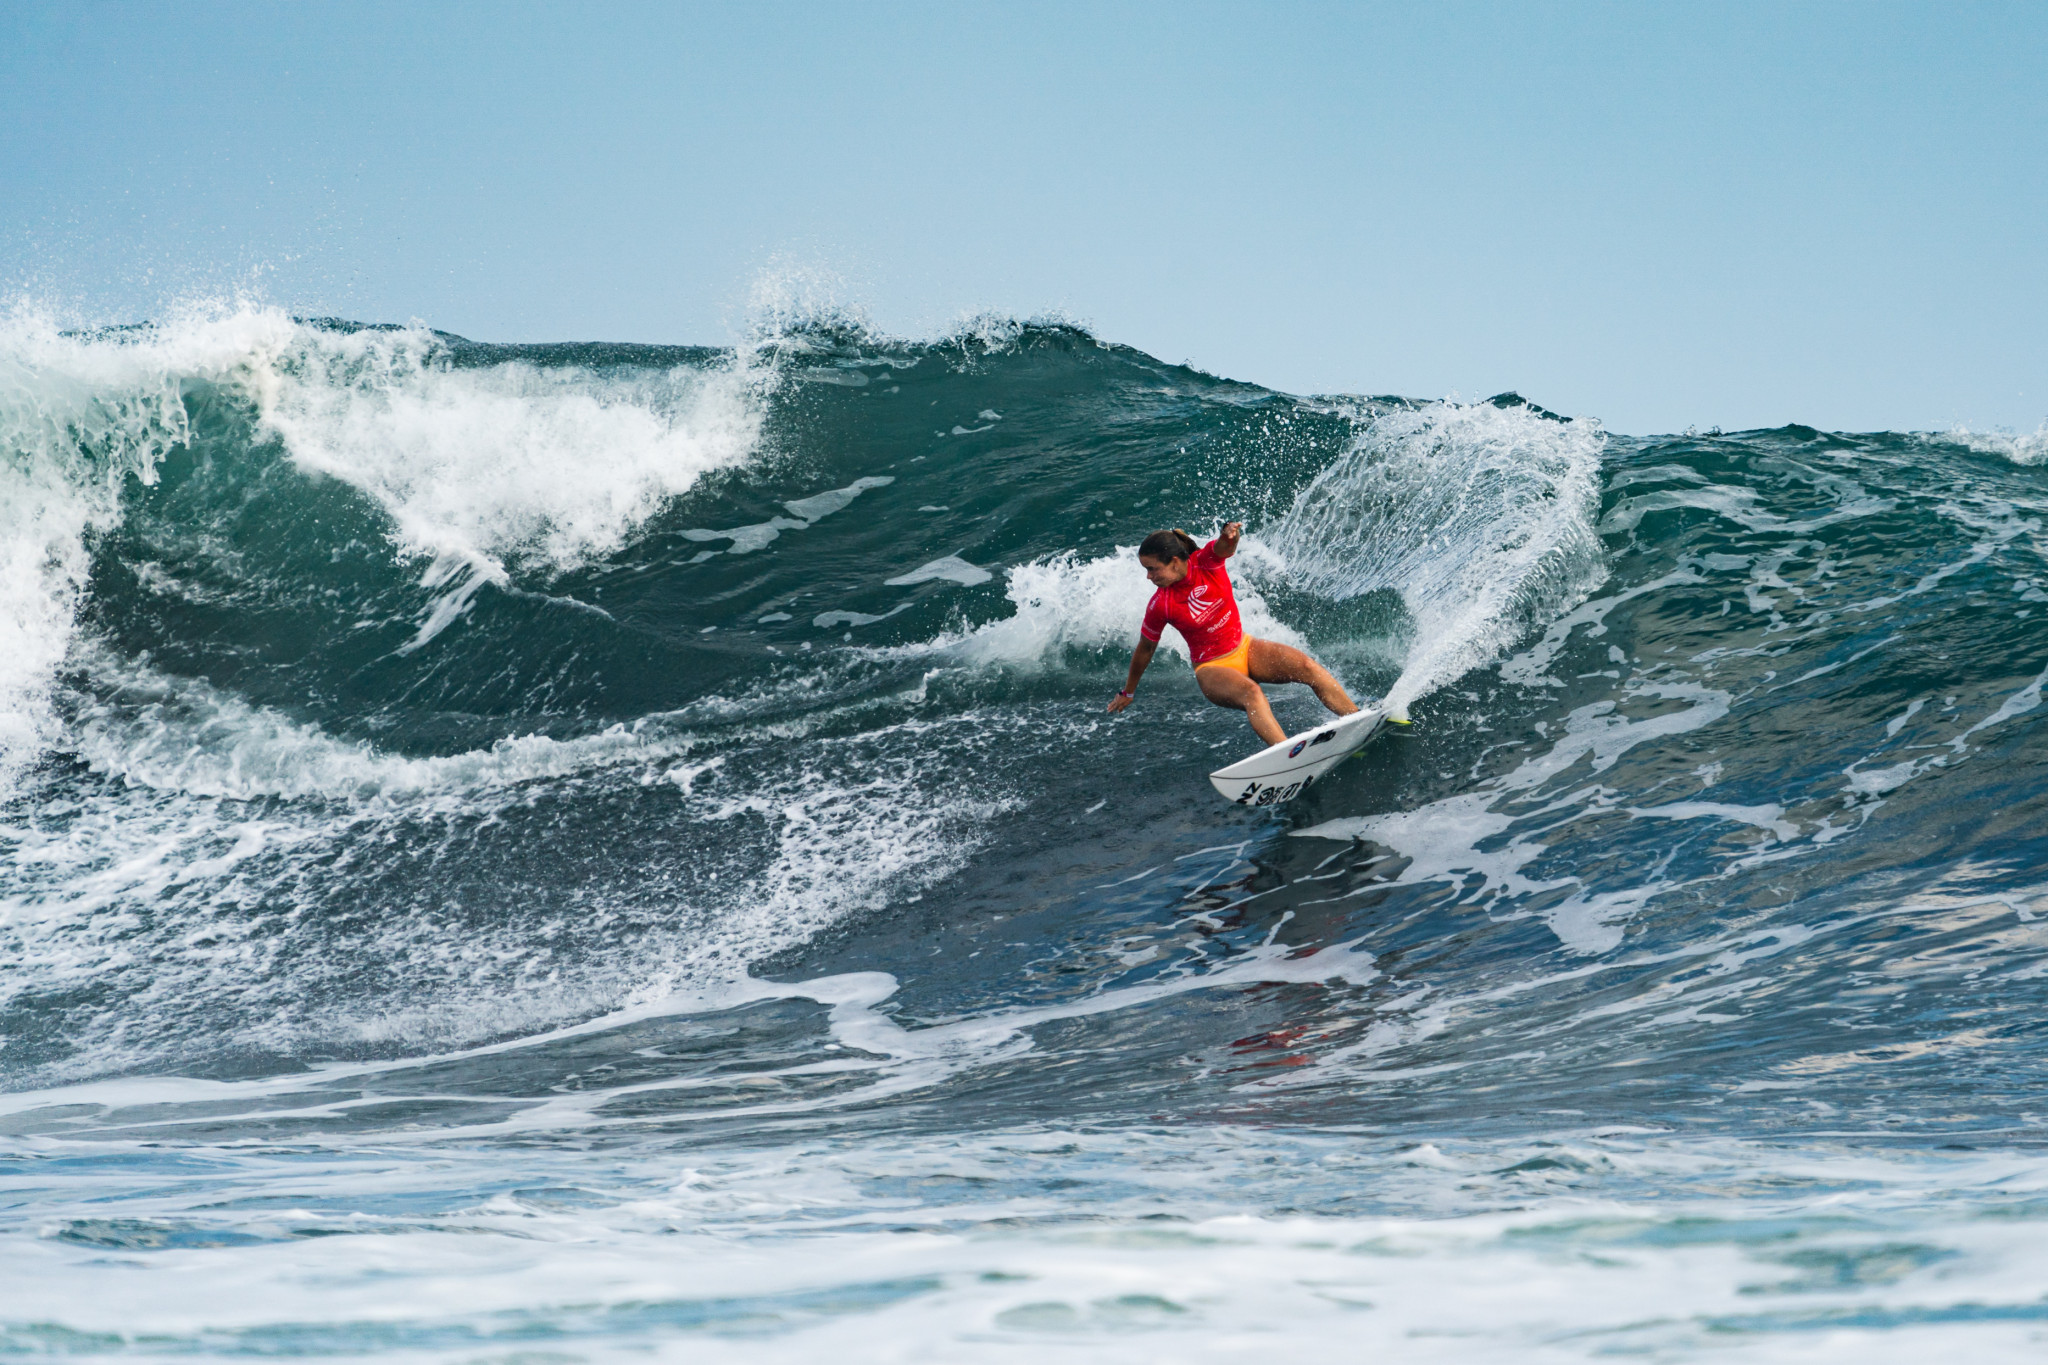 ISA President glad to see record-breaking 121 women in World Surfing Games field